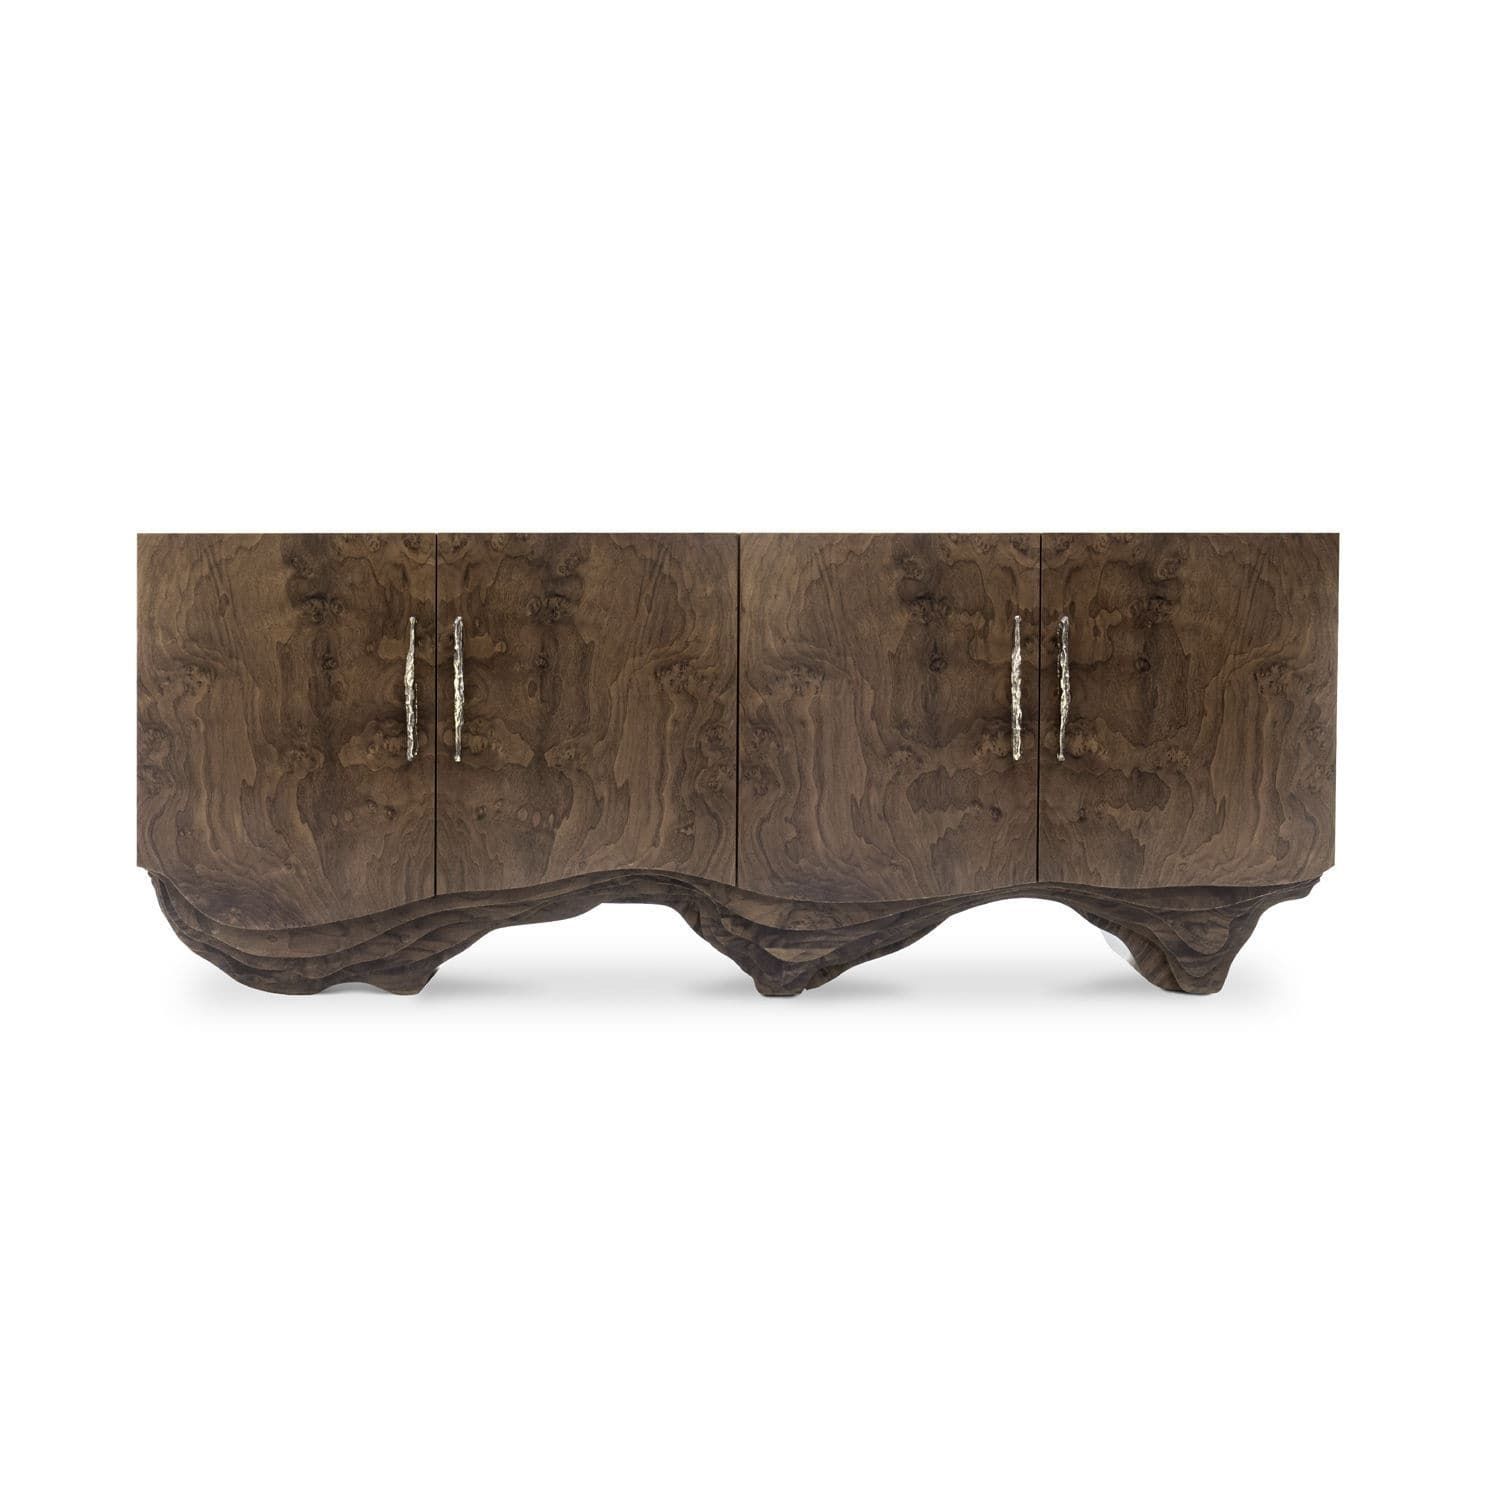 Contemporary Sideboard / Walnut / Wood Veneer / Polished Brass Throughout 2018 Walnut Finish Contempo Sideboards (View 3 of 20)